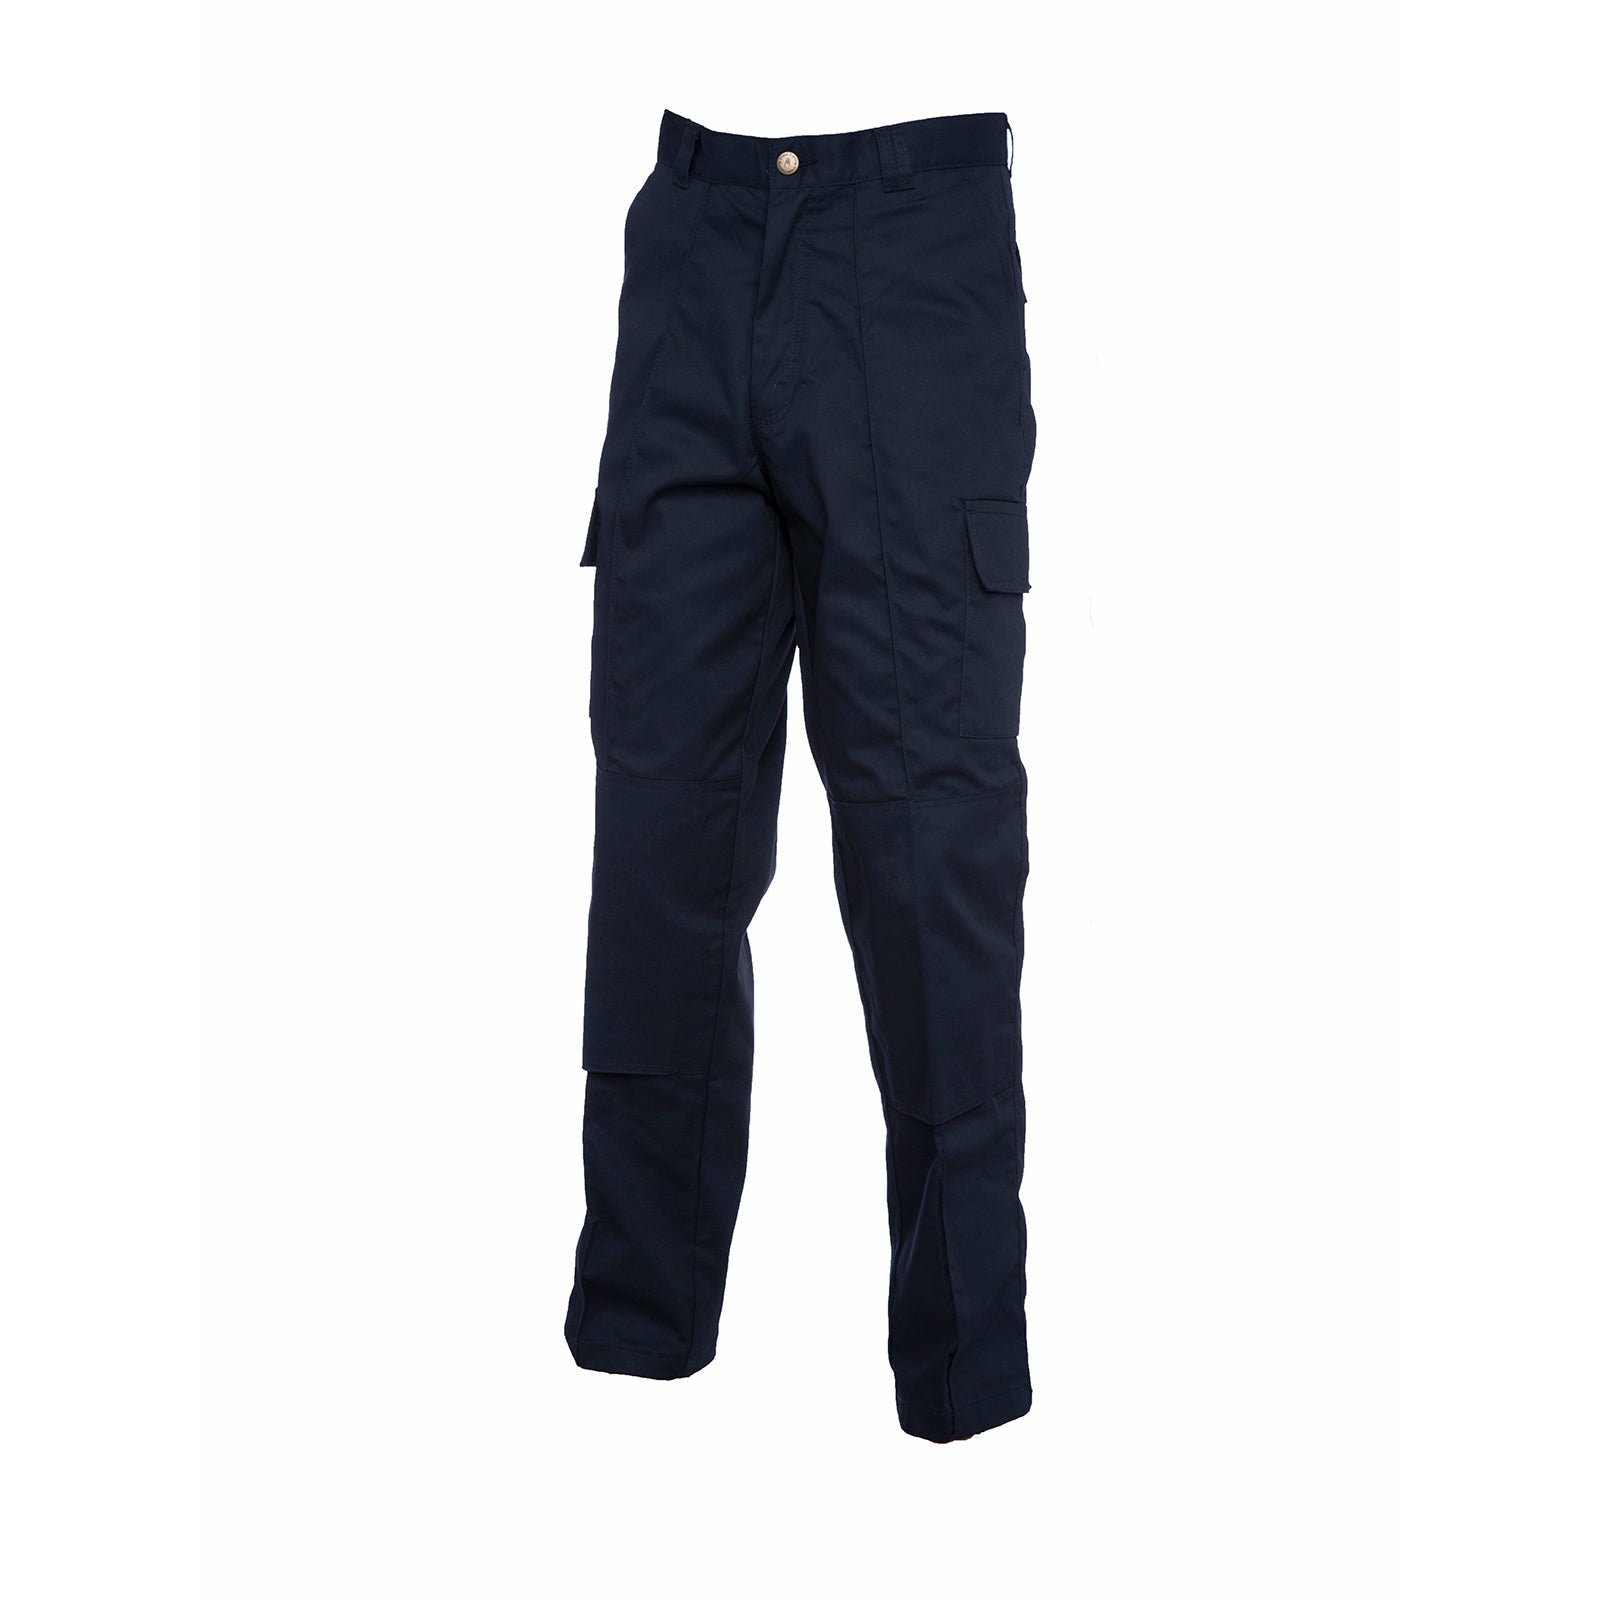 Cargo Trousers with Knee Pad Pockets Regular Navy